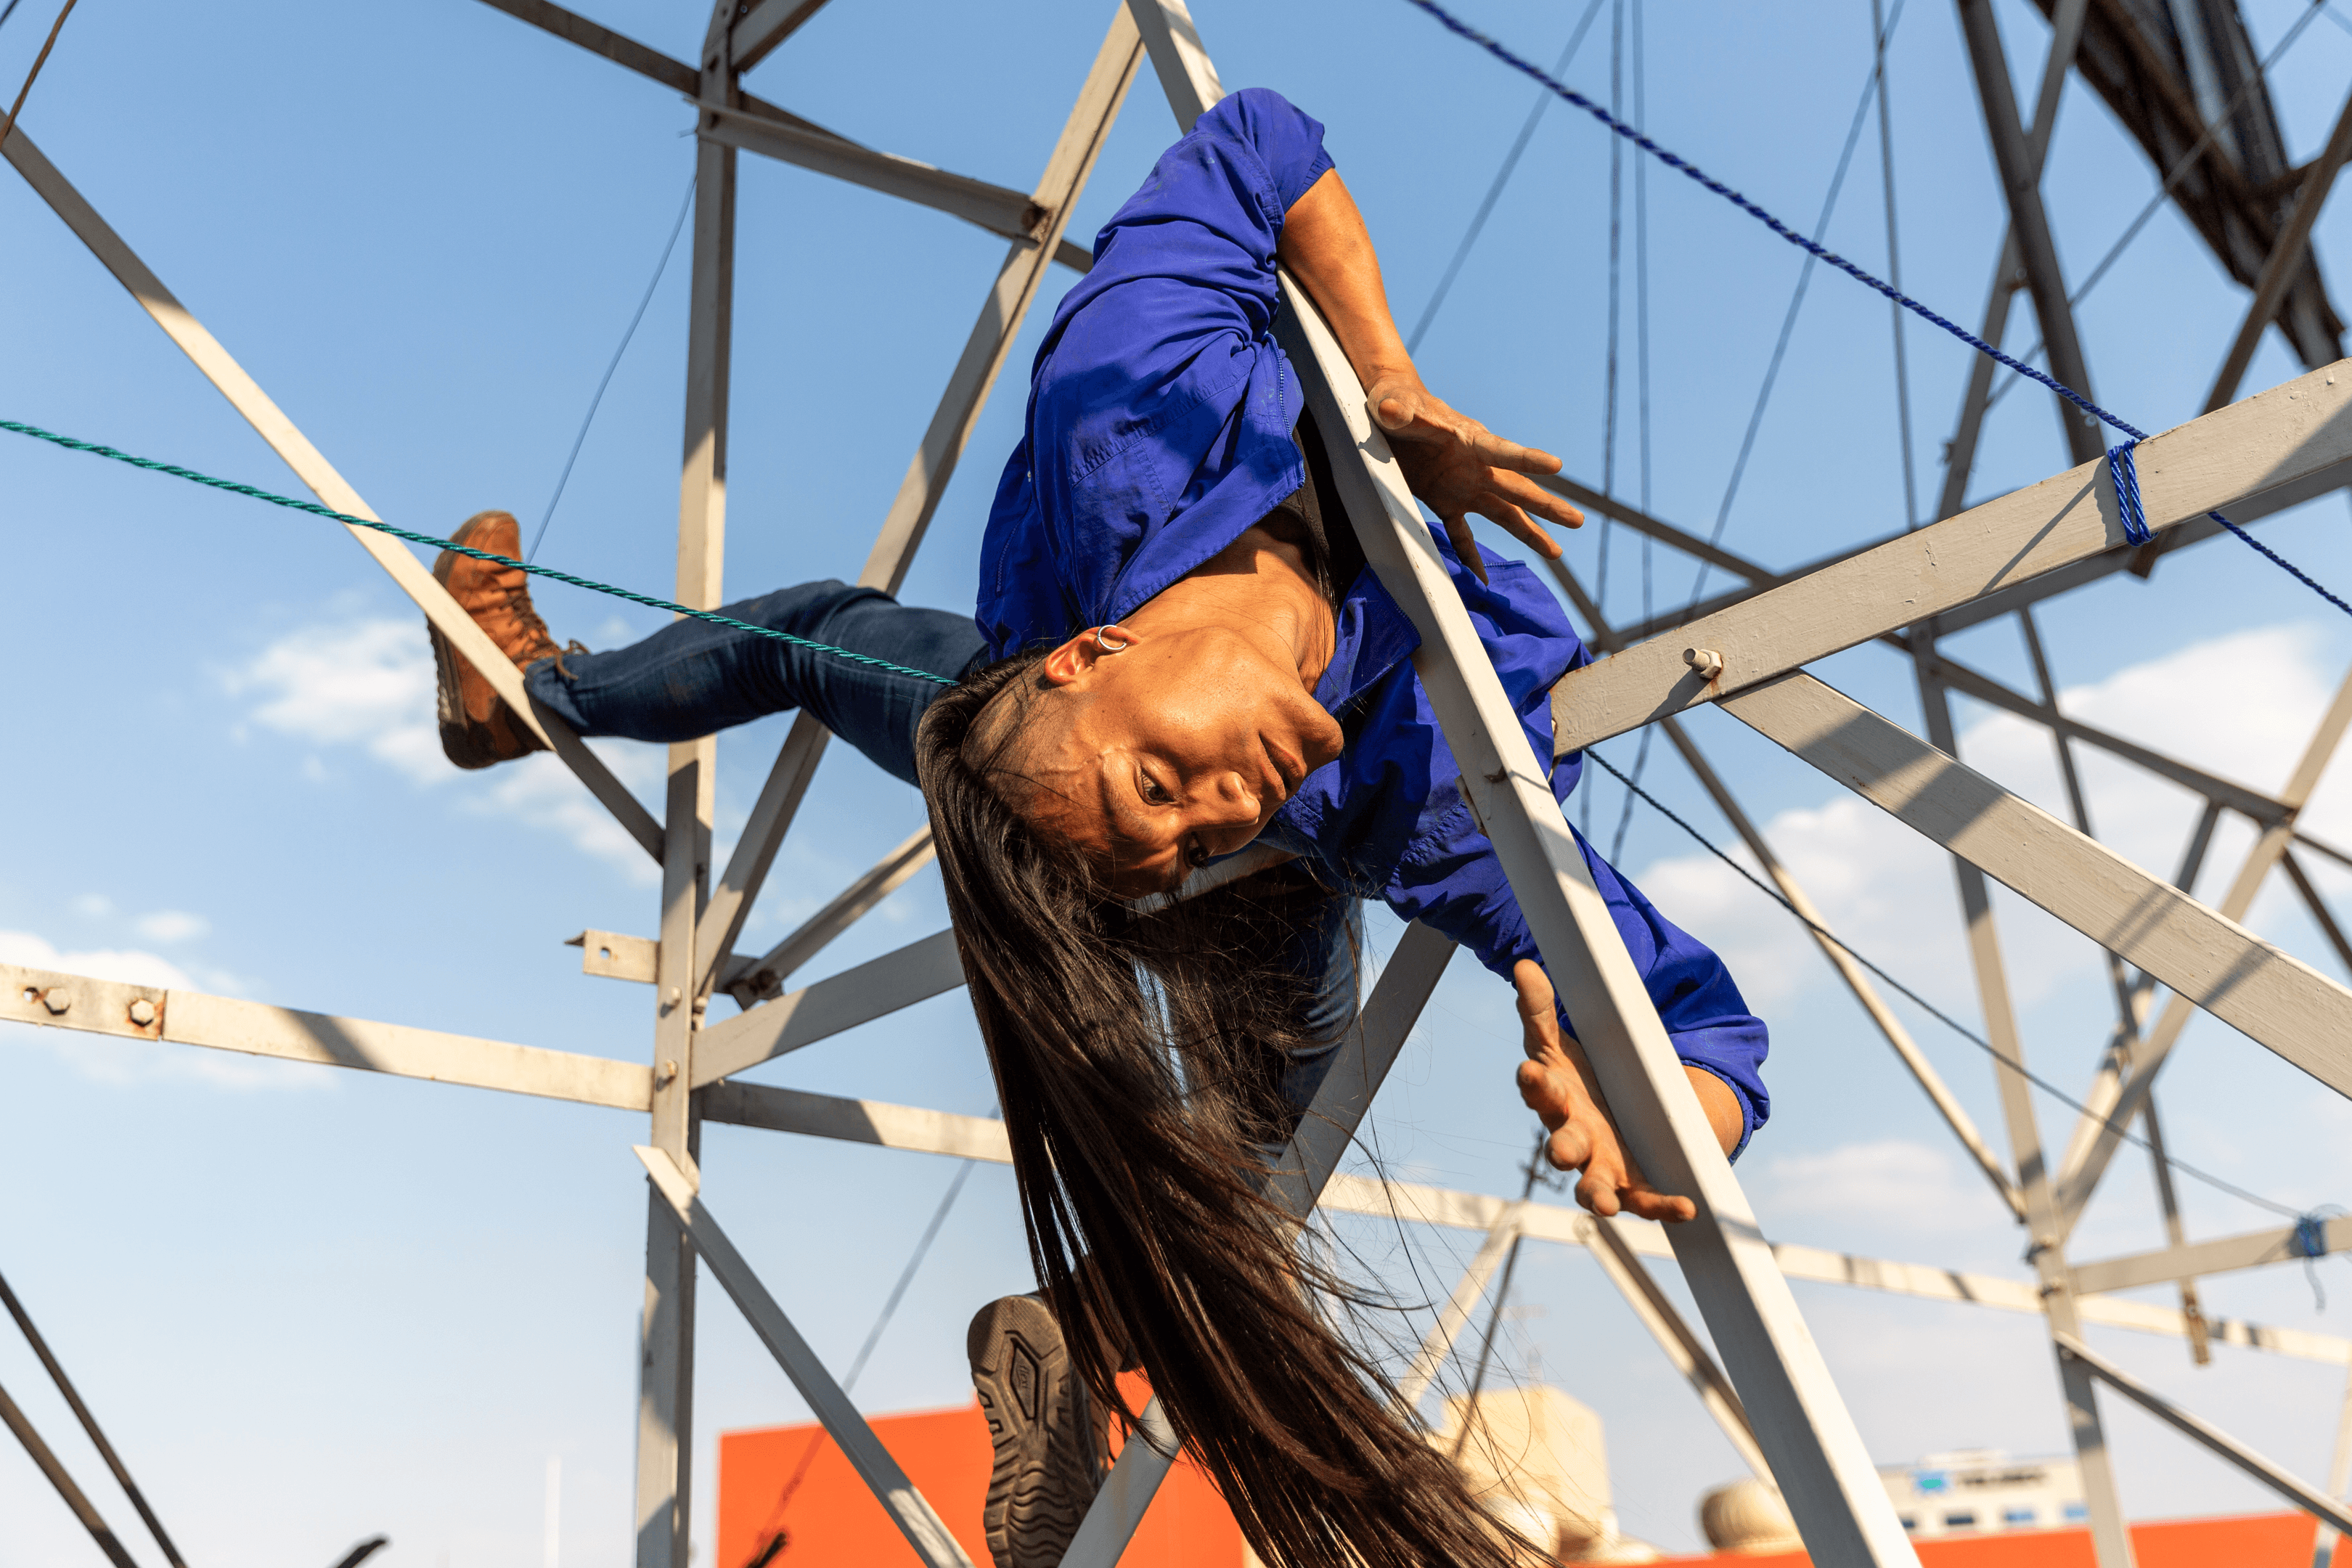 Dancers on Rooftops #104 - Jose (Mexico, 2022)